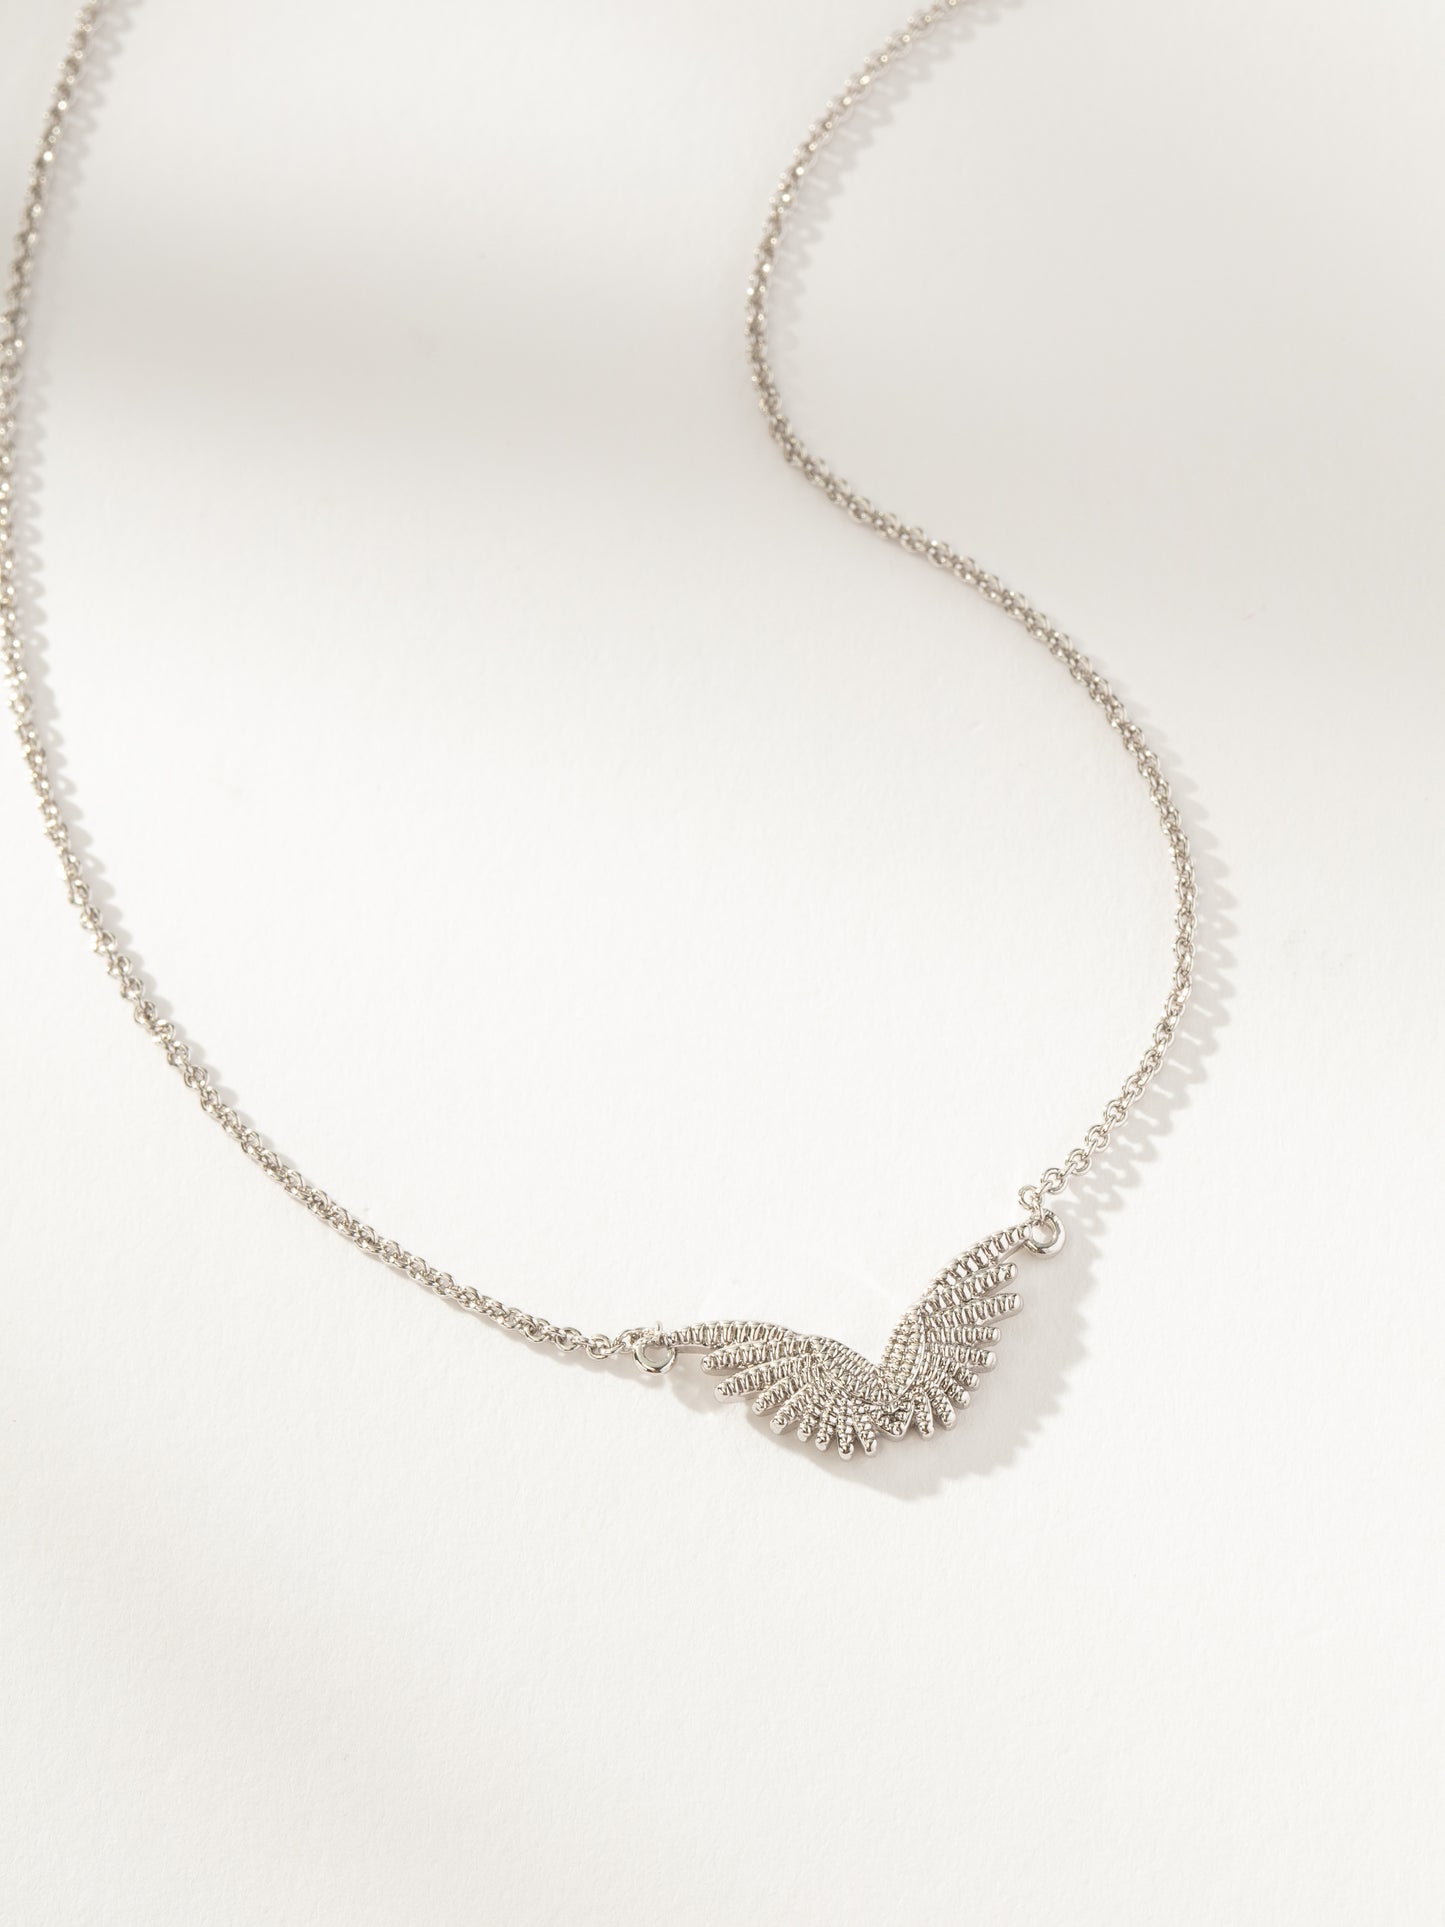 Protection Necklace | Silver | Product Detail Image | Uncommon James